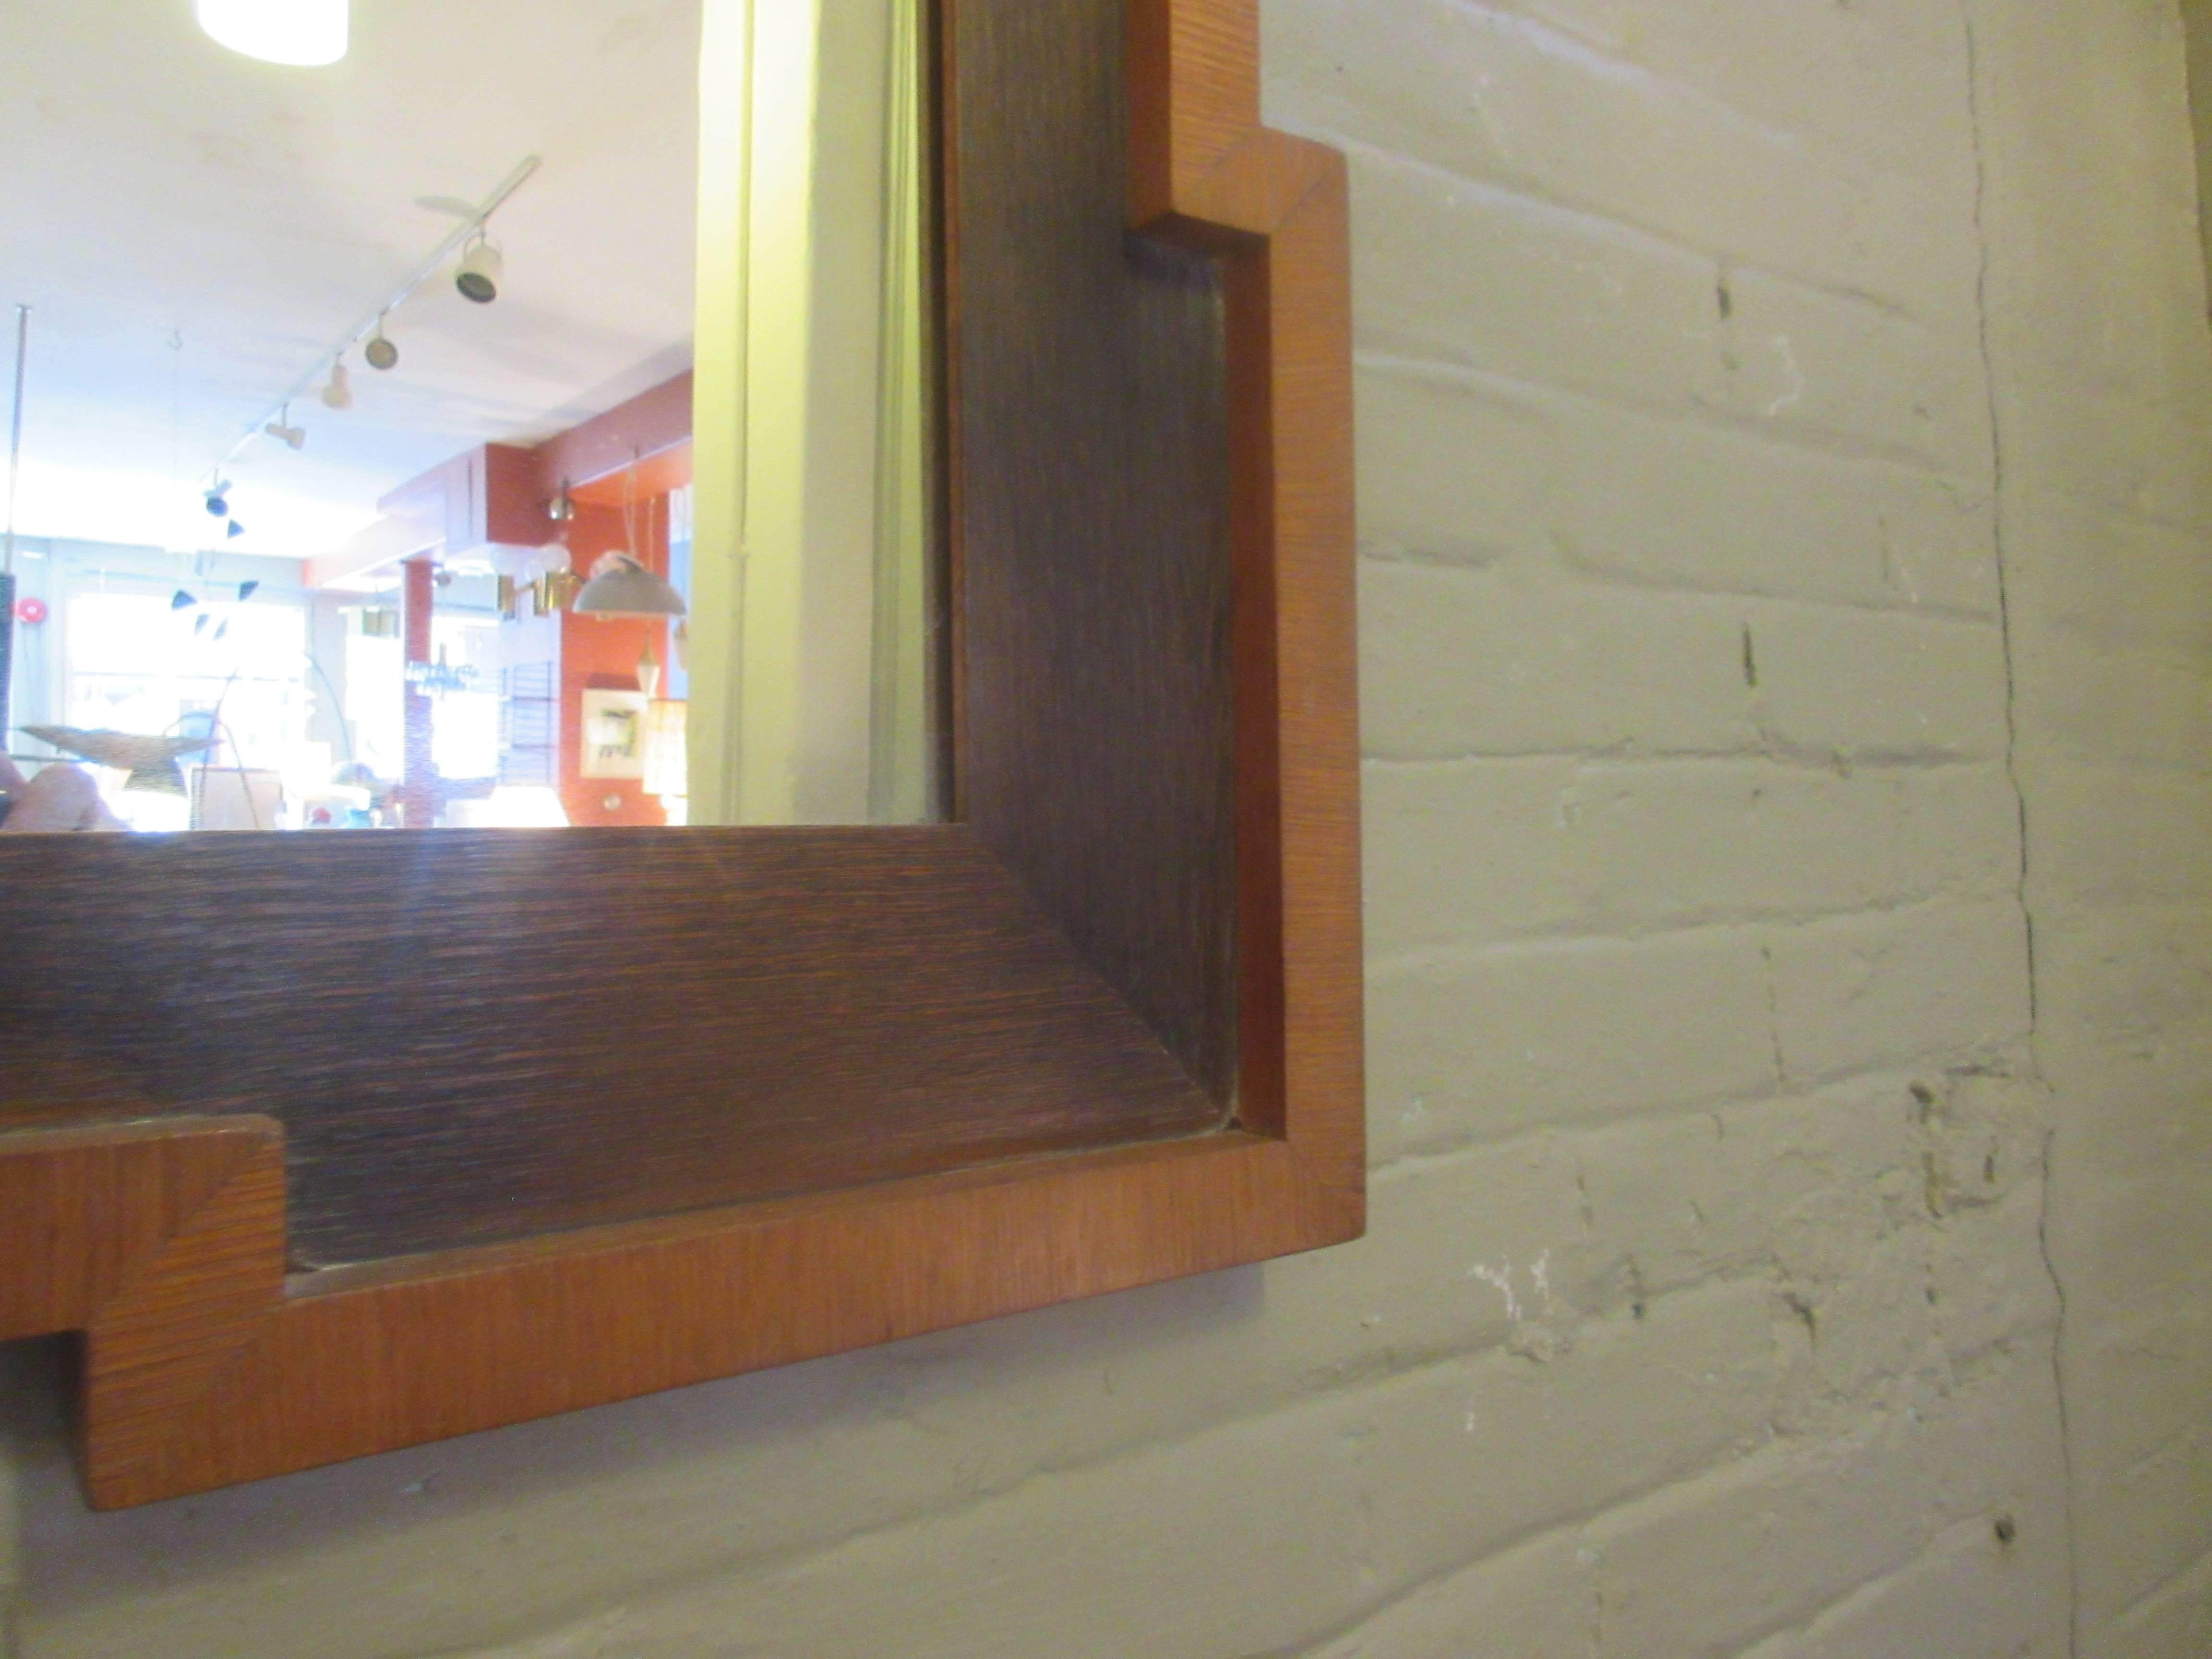 Veneered framed wall mirror from the 1940s with ebonized interior frame and honey oak outer frame.